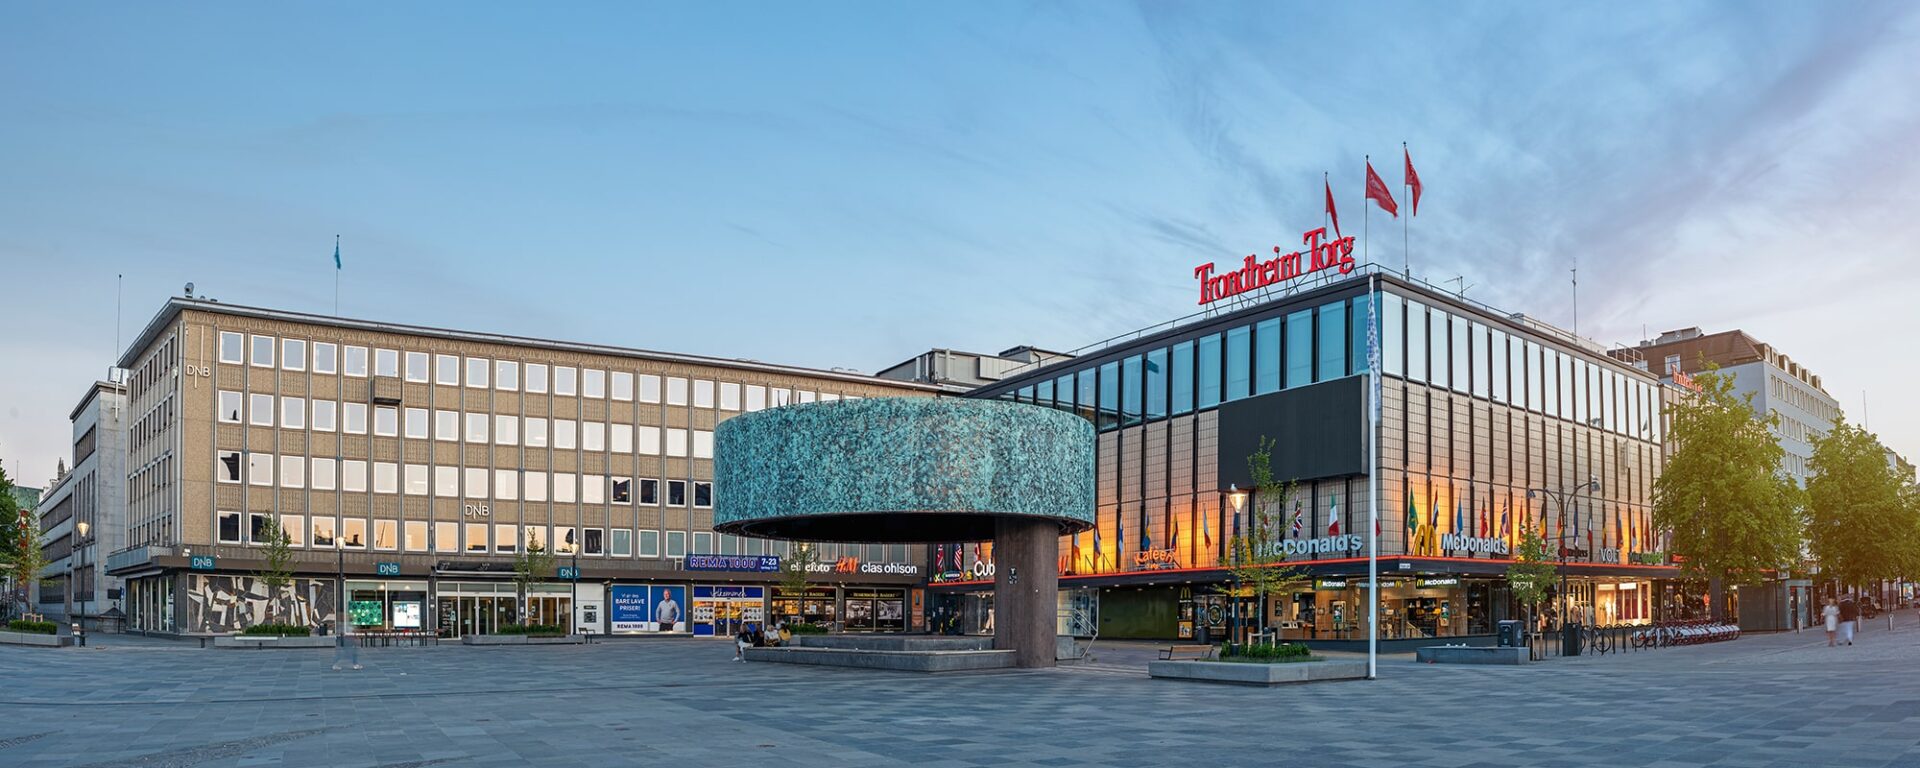 Featured image for “Trondheim Torg”